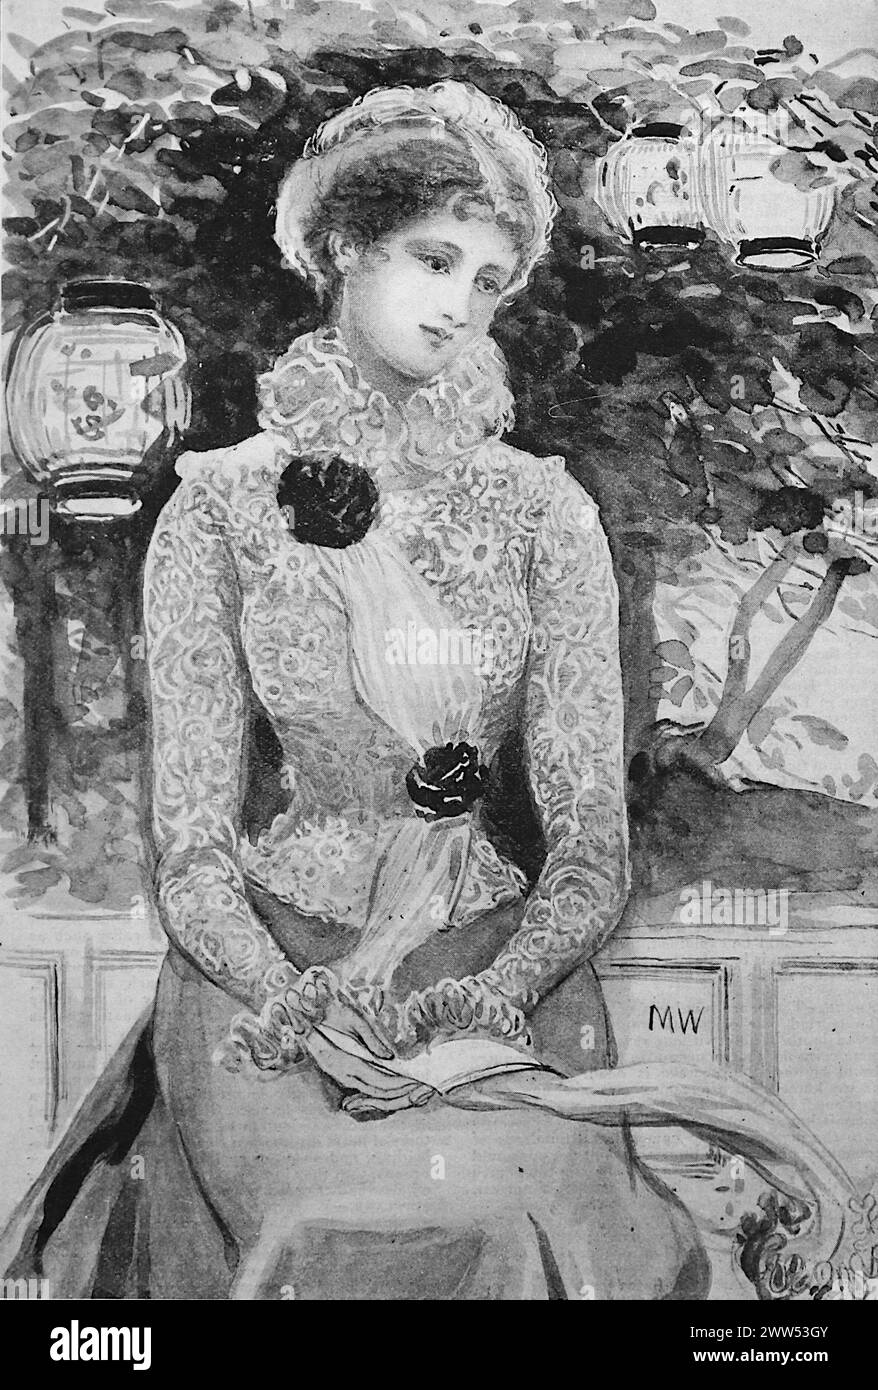 A lady wearing a Guipure lace blouse, by M.W.  Black and white. Photograph taken from a magazine originally published in 1899. Stock Photo